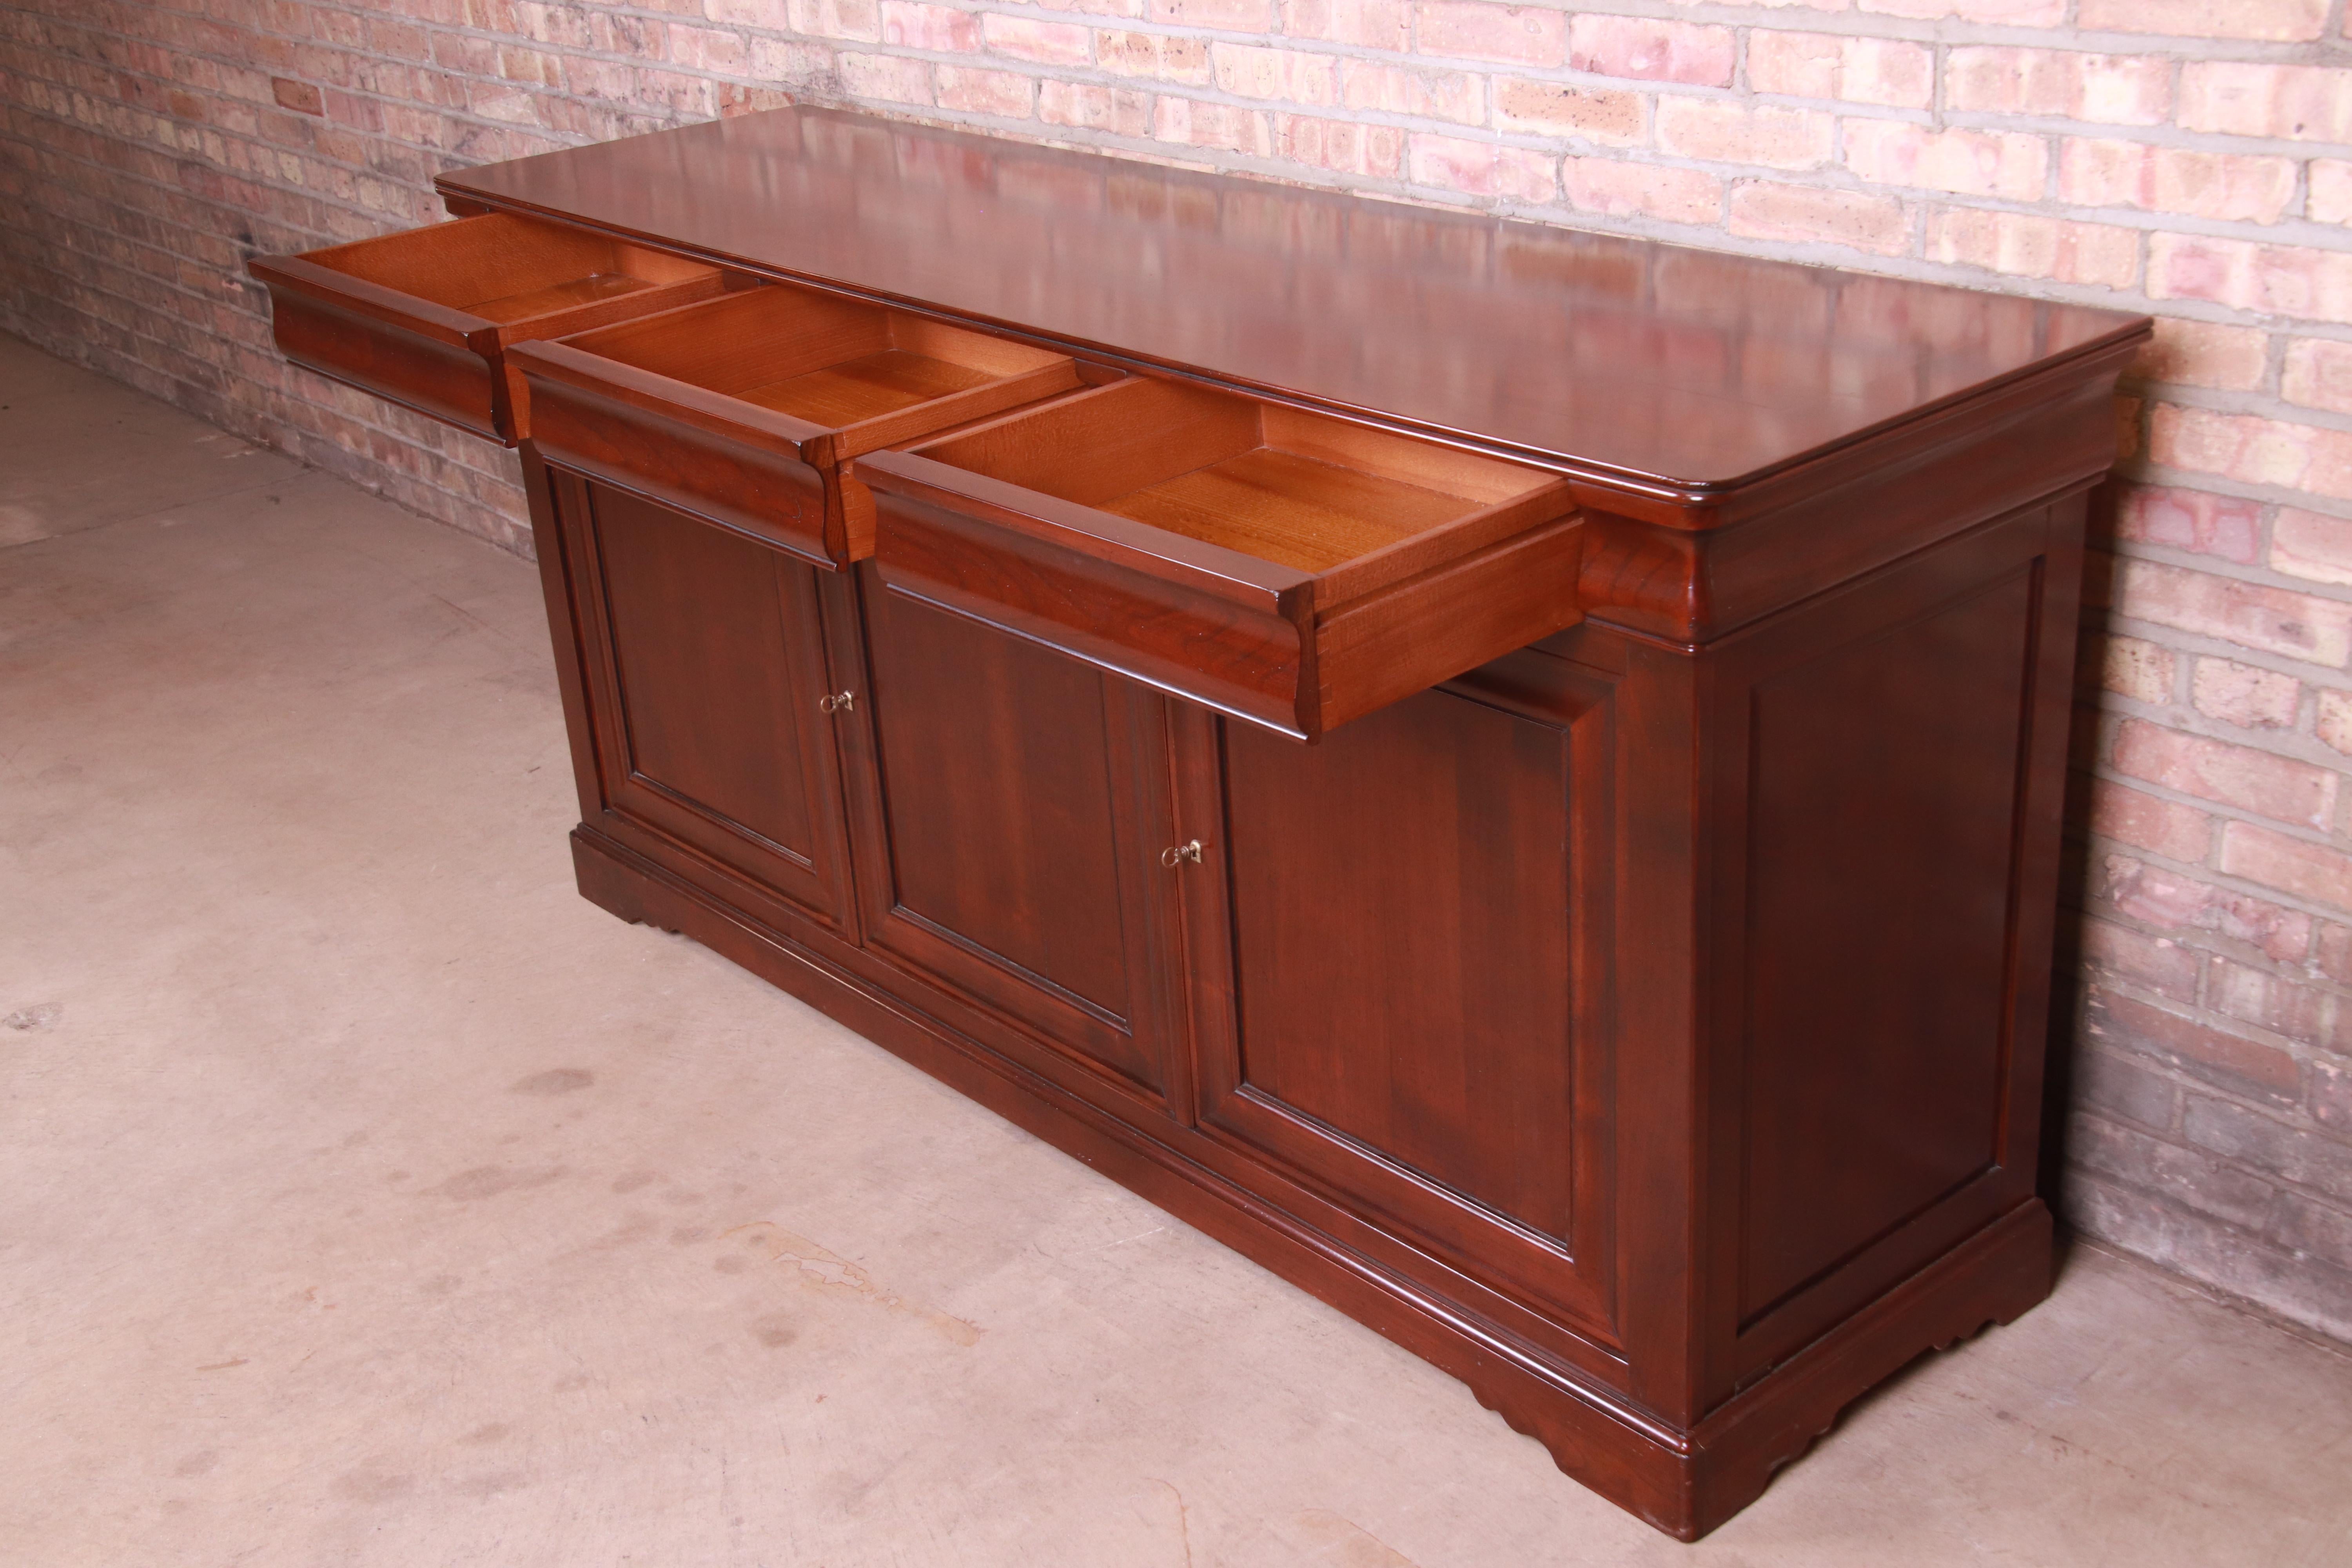 Grange French Provincial Cherry Wood Sideboard Credenza or Bar Cabinet 2